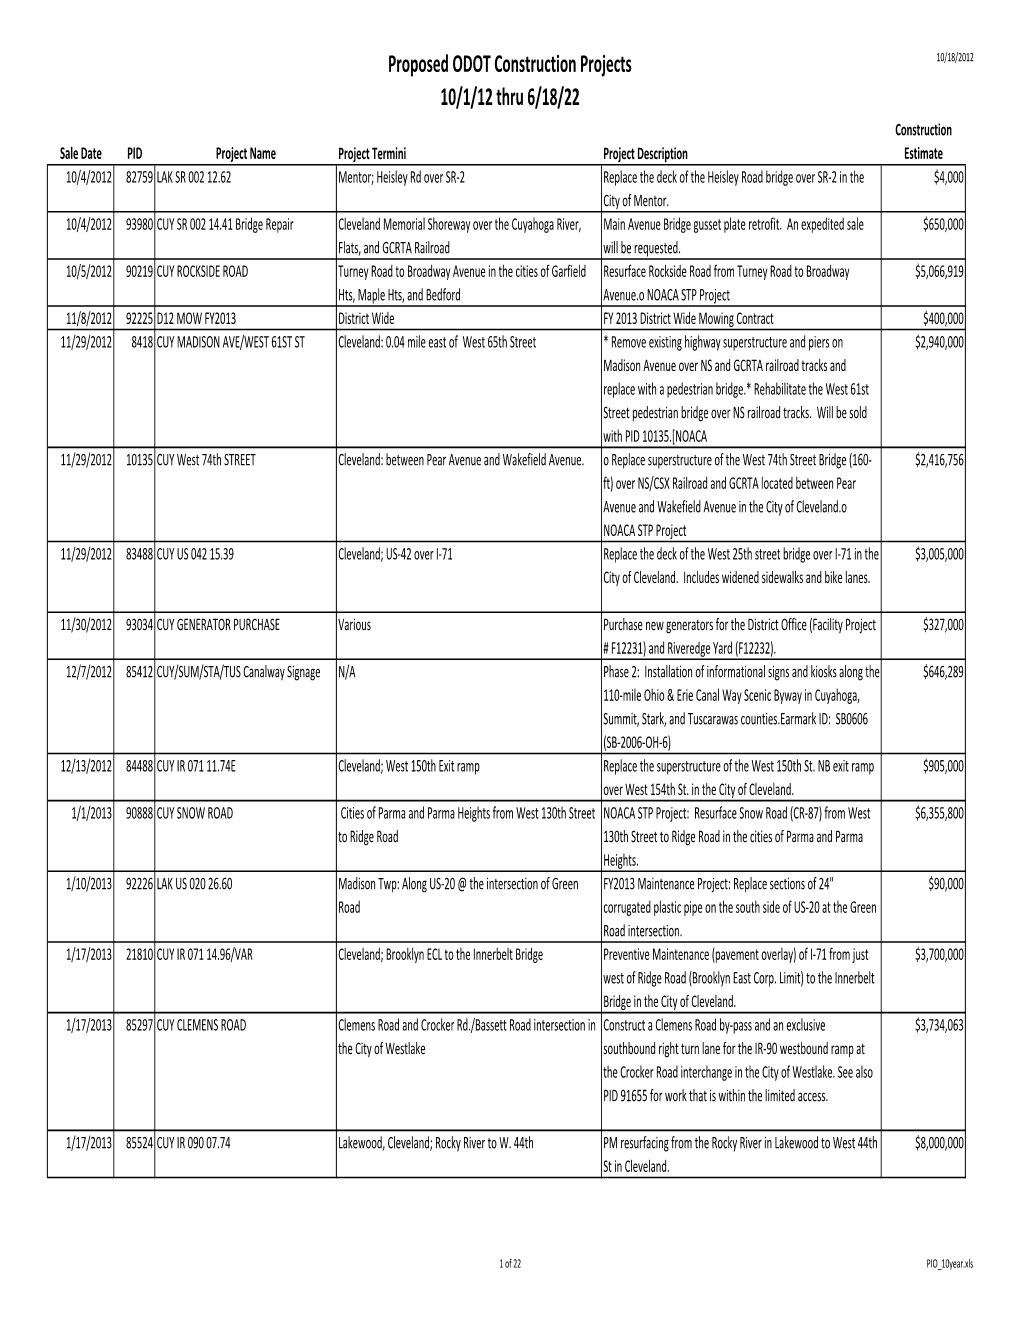 Proposed ODOT Construction Projects 10/1/12 Thru 6/18/22